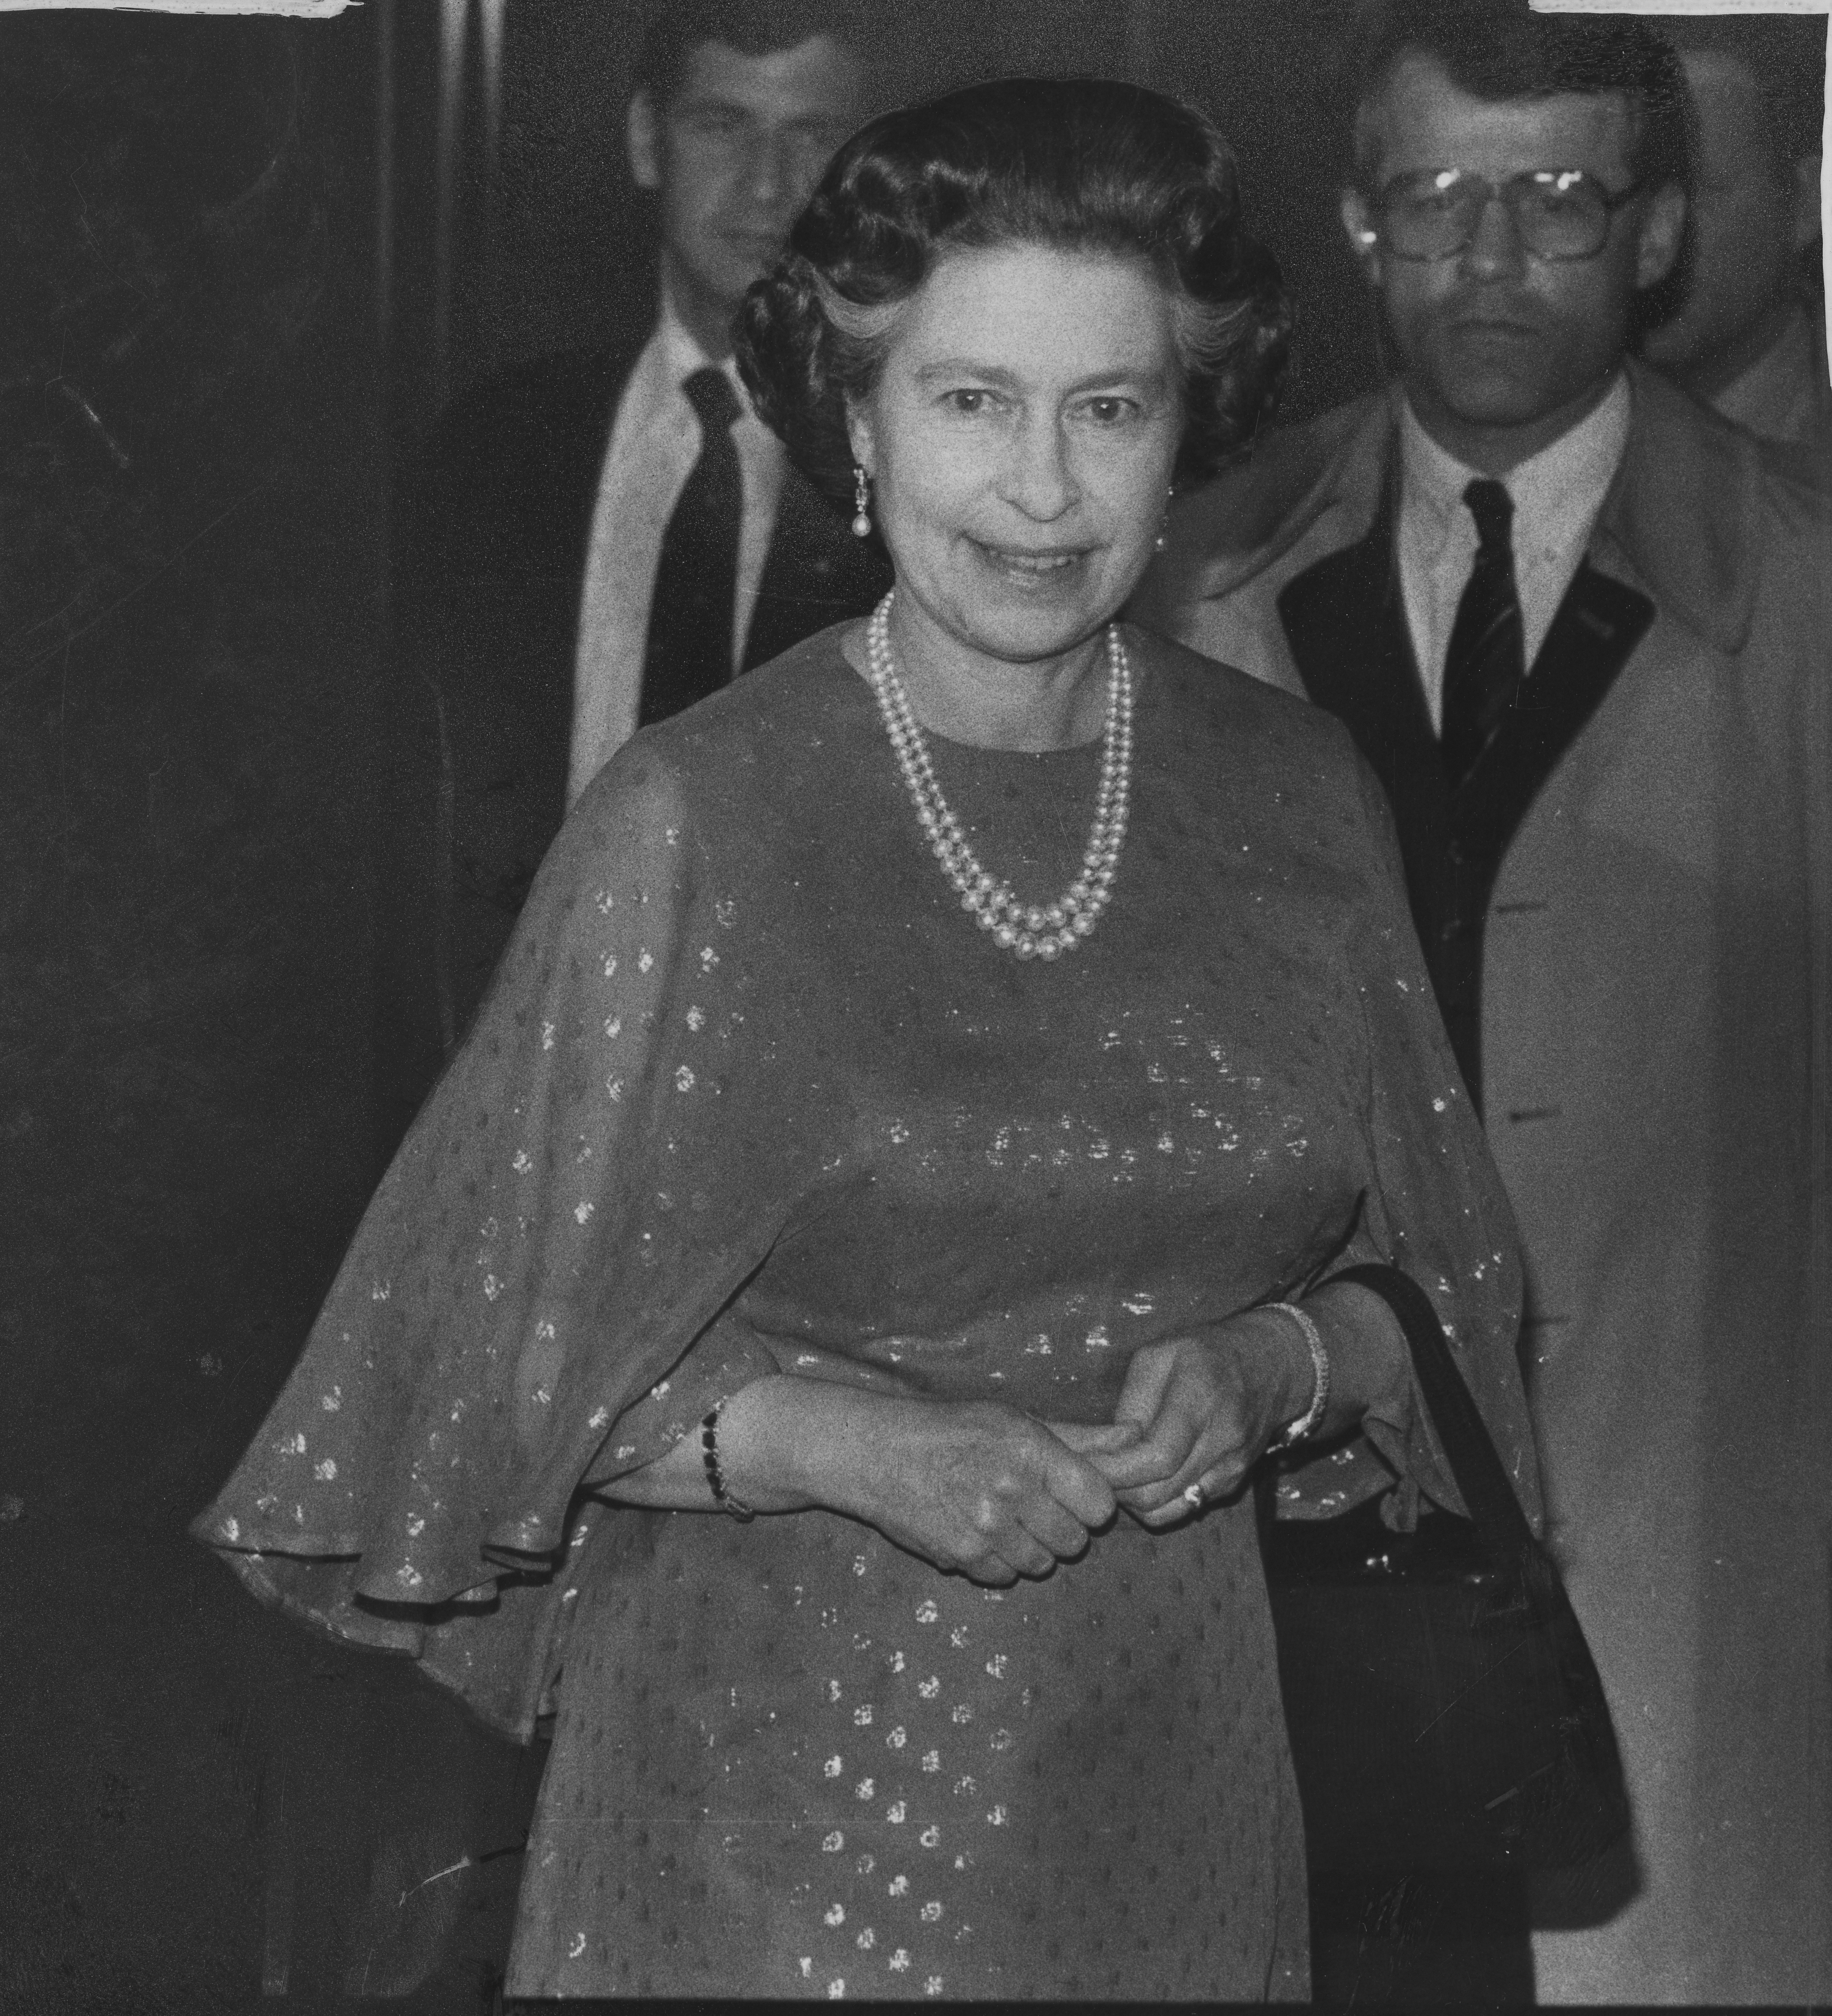 Queen Elizabeth II of Great Britain visits San Francisco. She is seen here in the St Francis Hotel lobby, on their way to dinner, March 2, 1983.